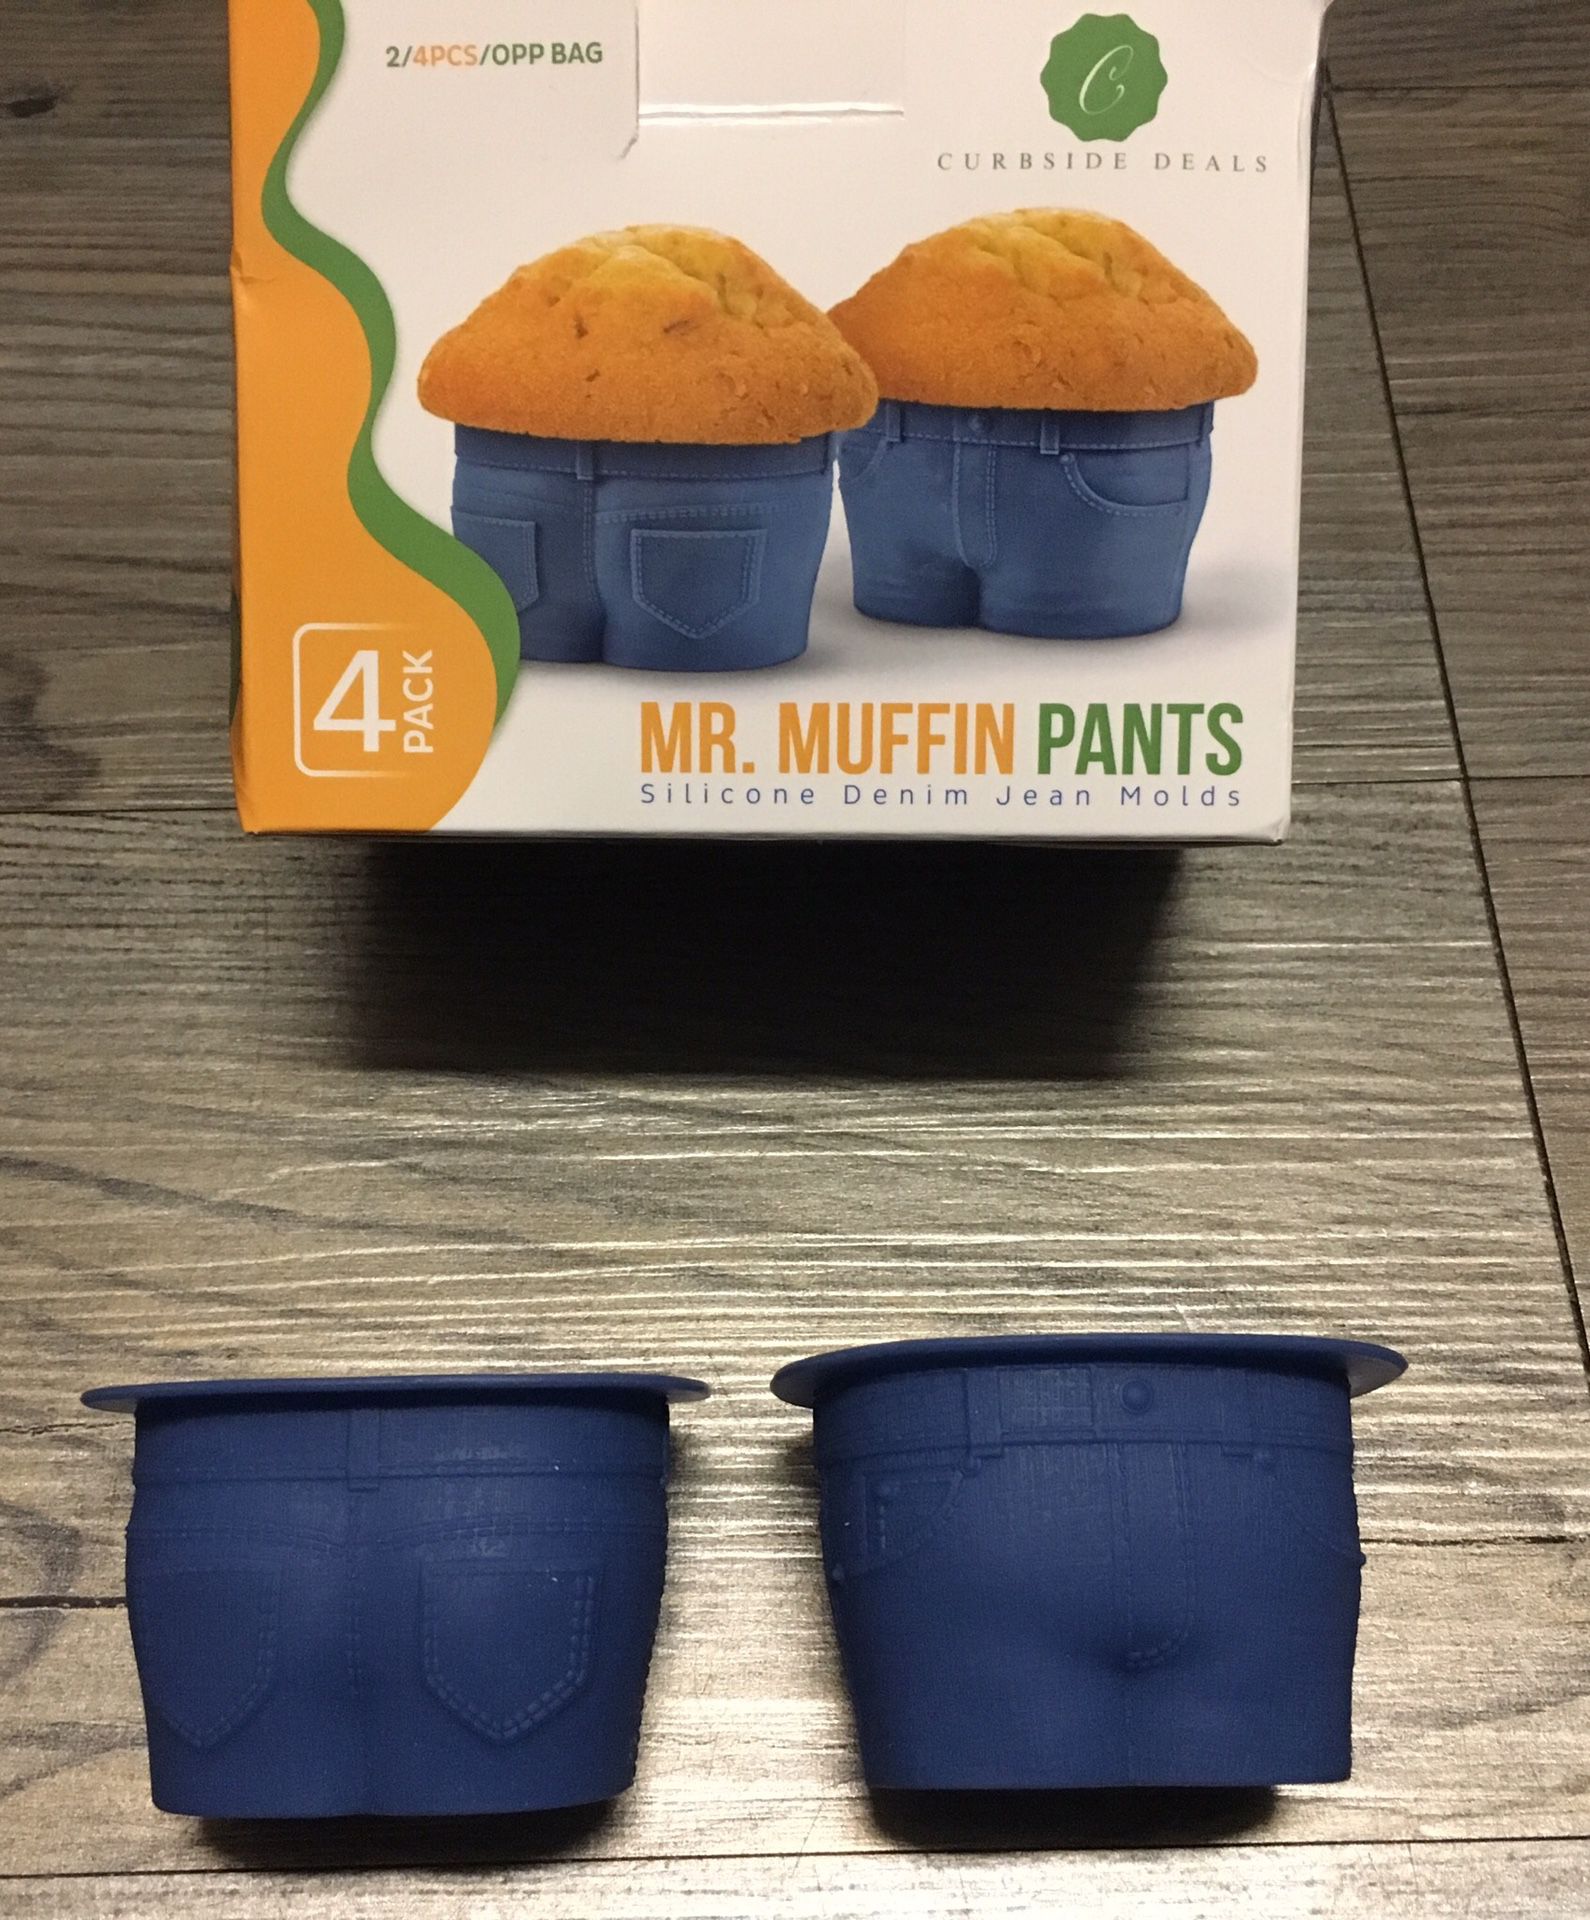 Muffin Cups Silicone Brownie Molds Denim-Style Cupcakes Pan Baking Silicone Jello Chocolate Molds Funny Gag Gifts, Hilarious Novelty White Elephant G